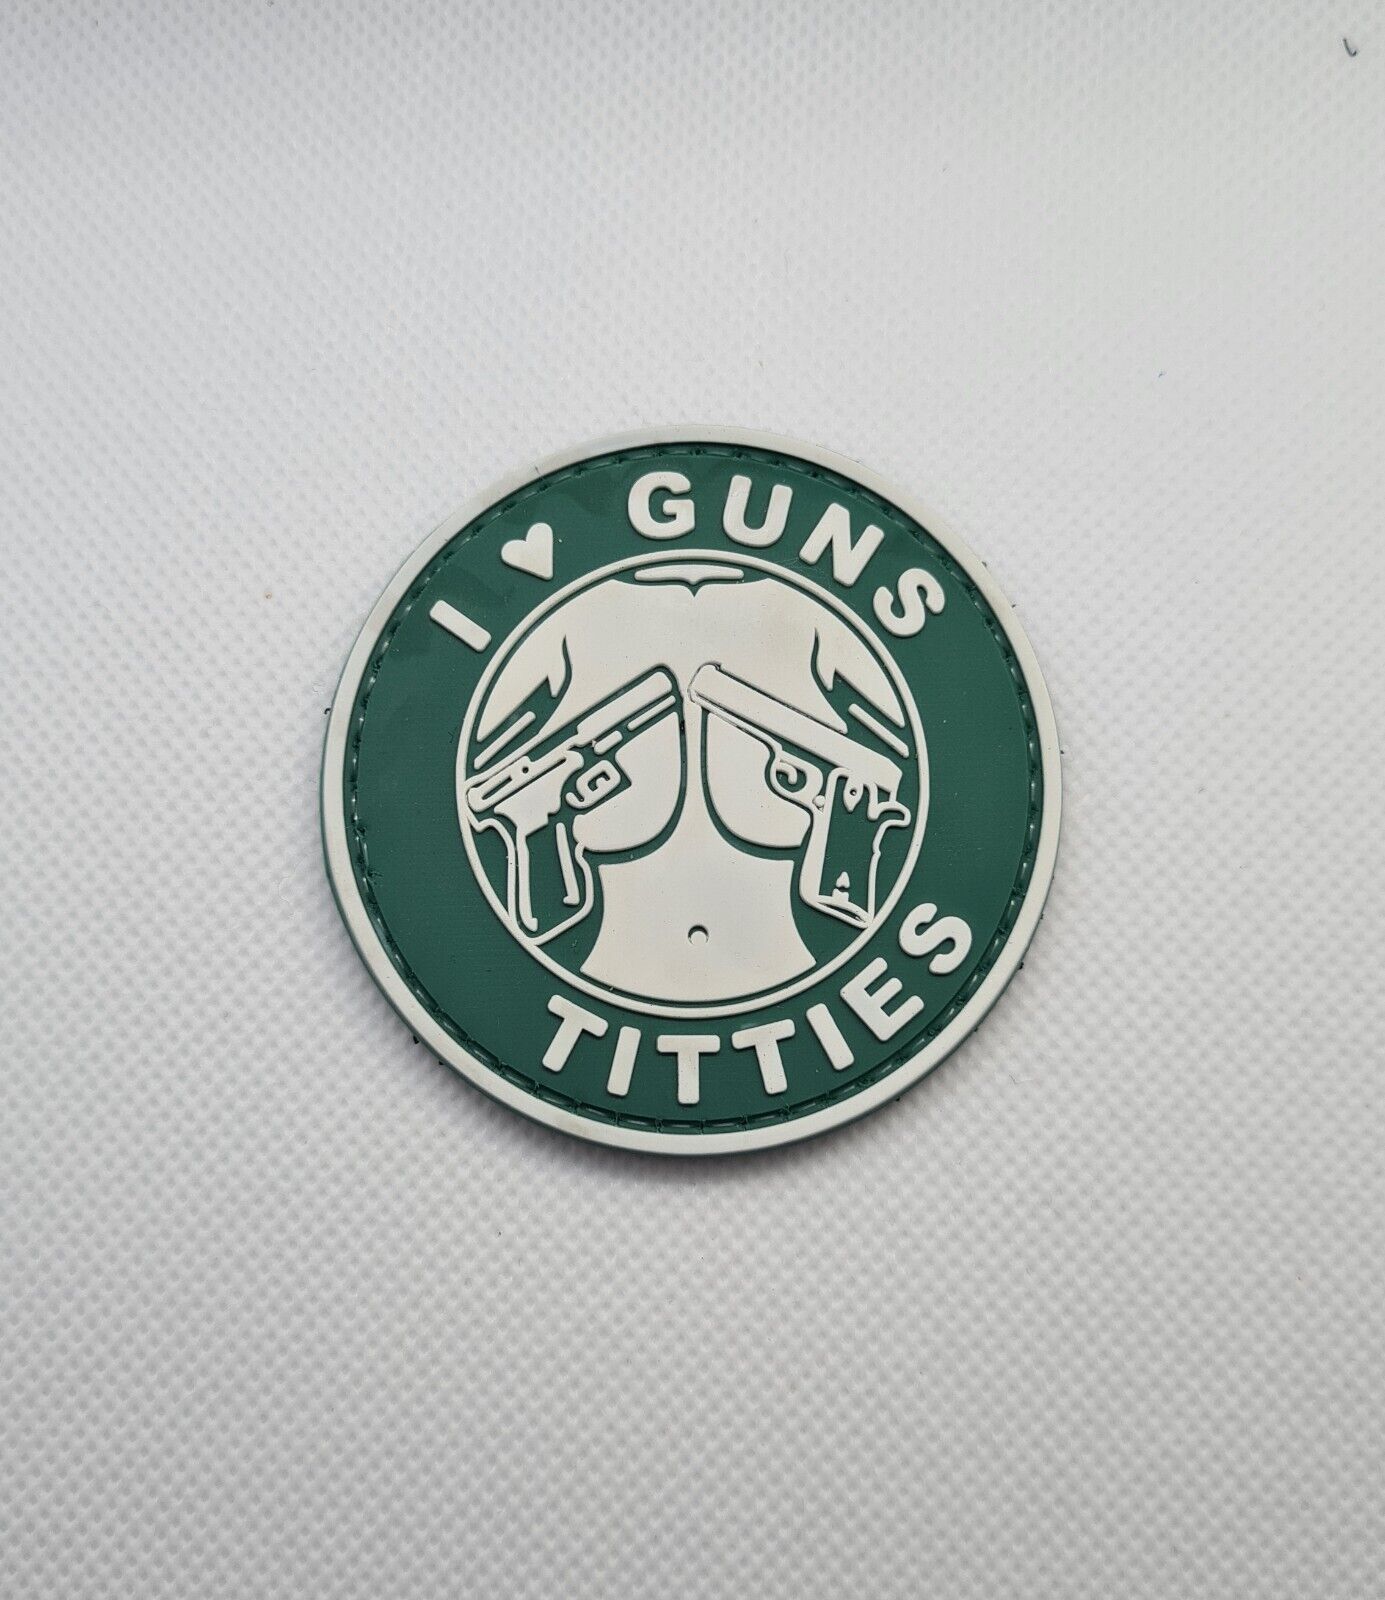 Guns and Titties Starbucks 3D PVC Tactical Morale Patch – Hook Backed